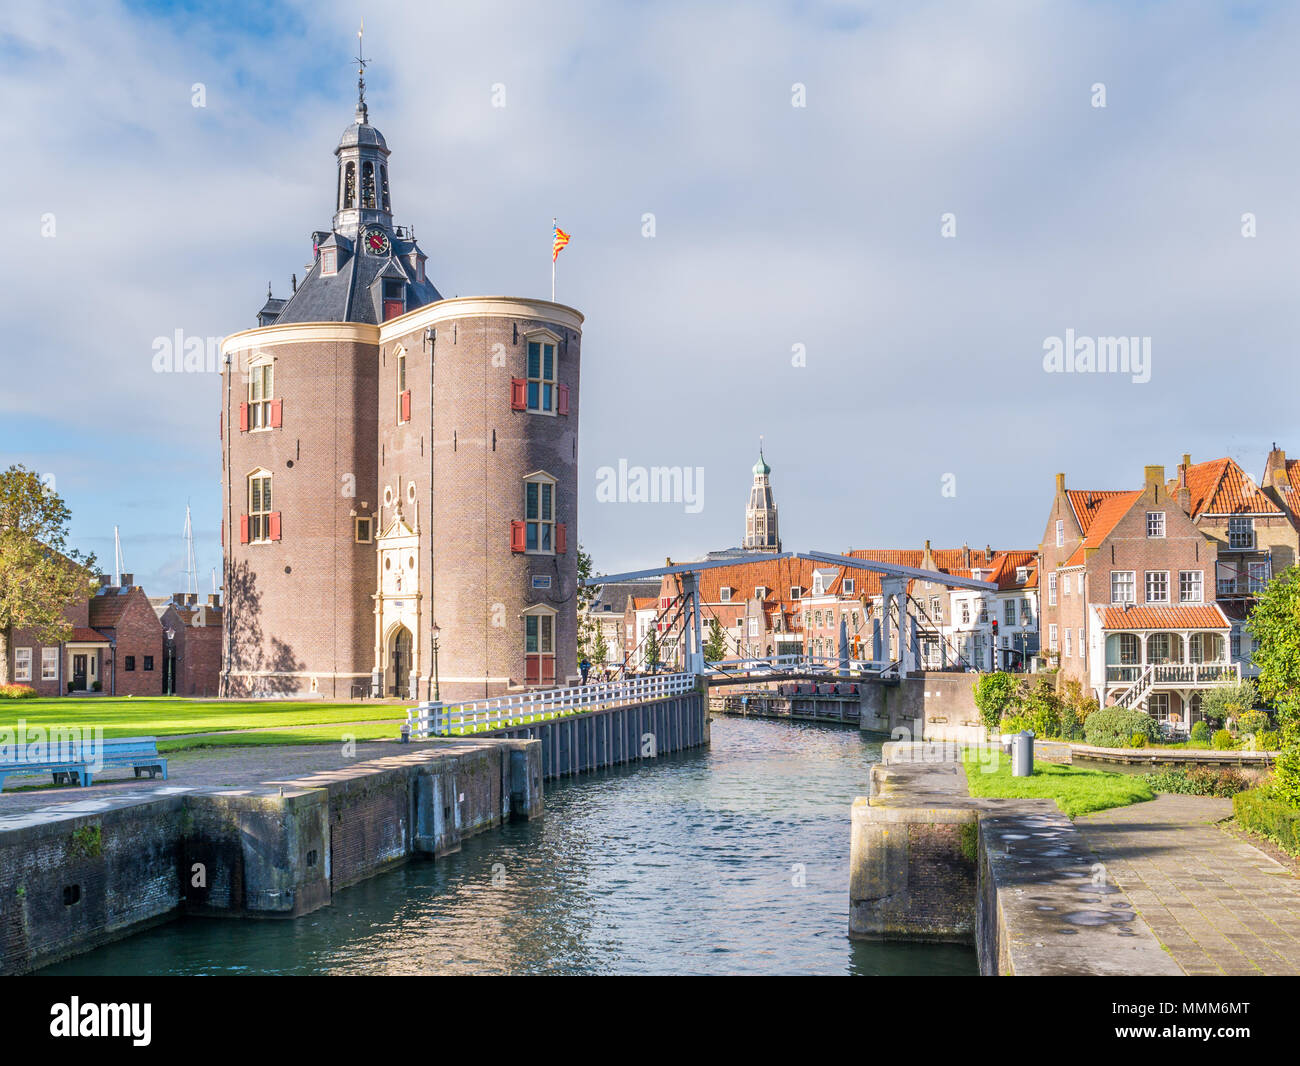 Drommedaris defence tower and draw bridge over canal in old harbour of historic city of Enkhuizen, Noord-Holland, Netherlands Stock Photo